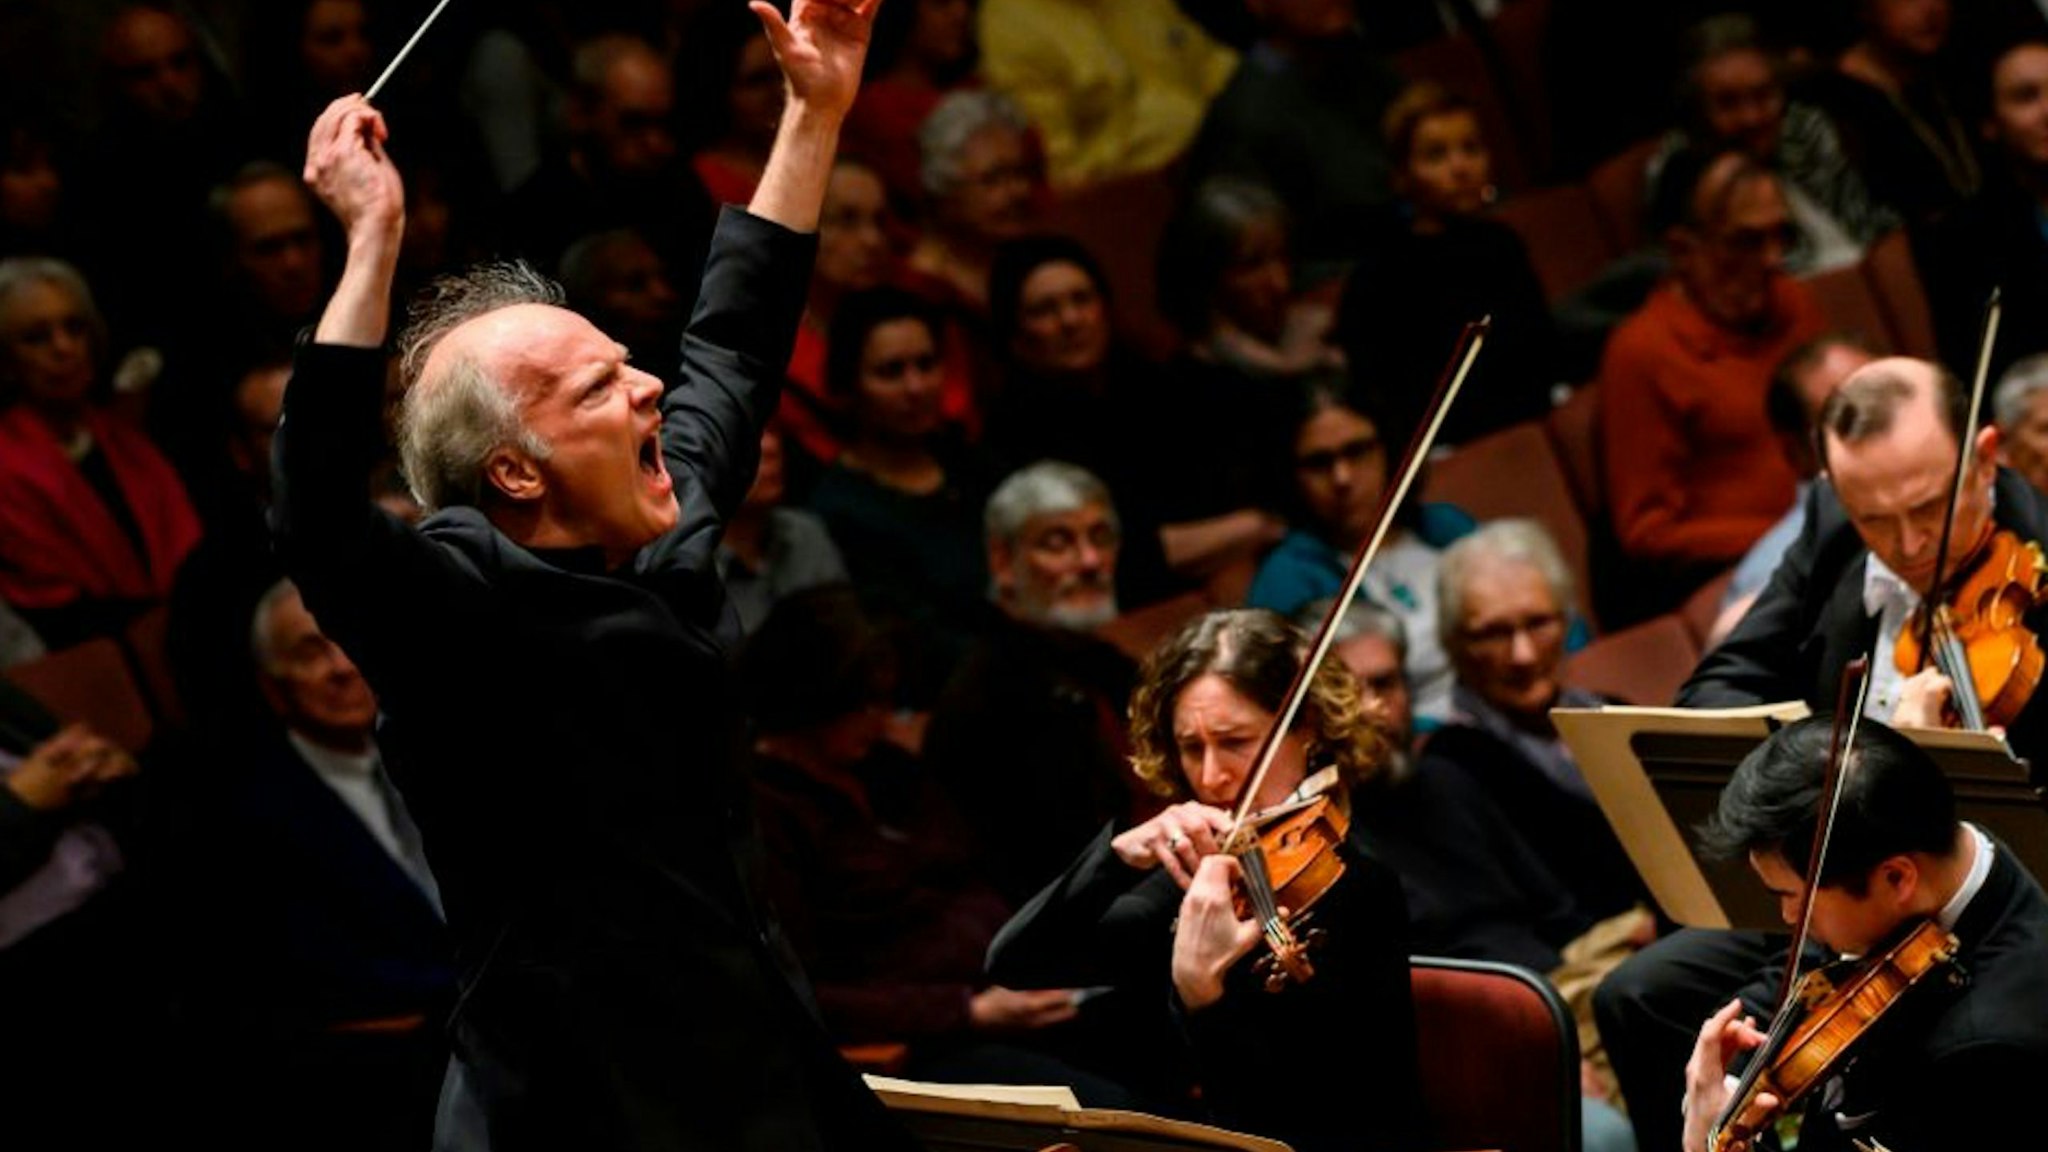 Italian conductor Gianandrea Noseda conducts the National Symphony Orchestra (NSO) during a concert at the John F. Kennedy Center for the Performing Arts in Washington DC, on February 14, 2019.